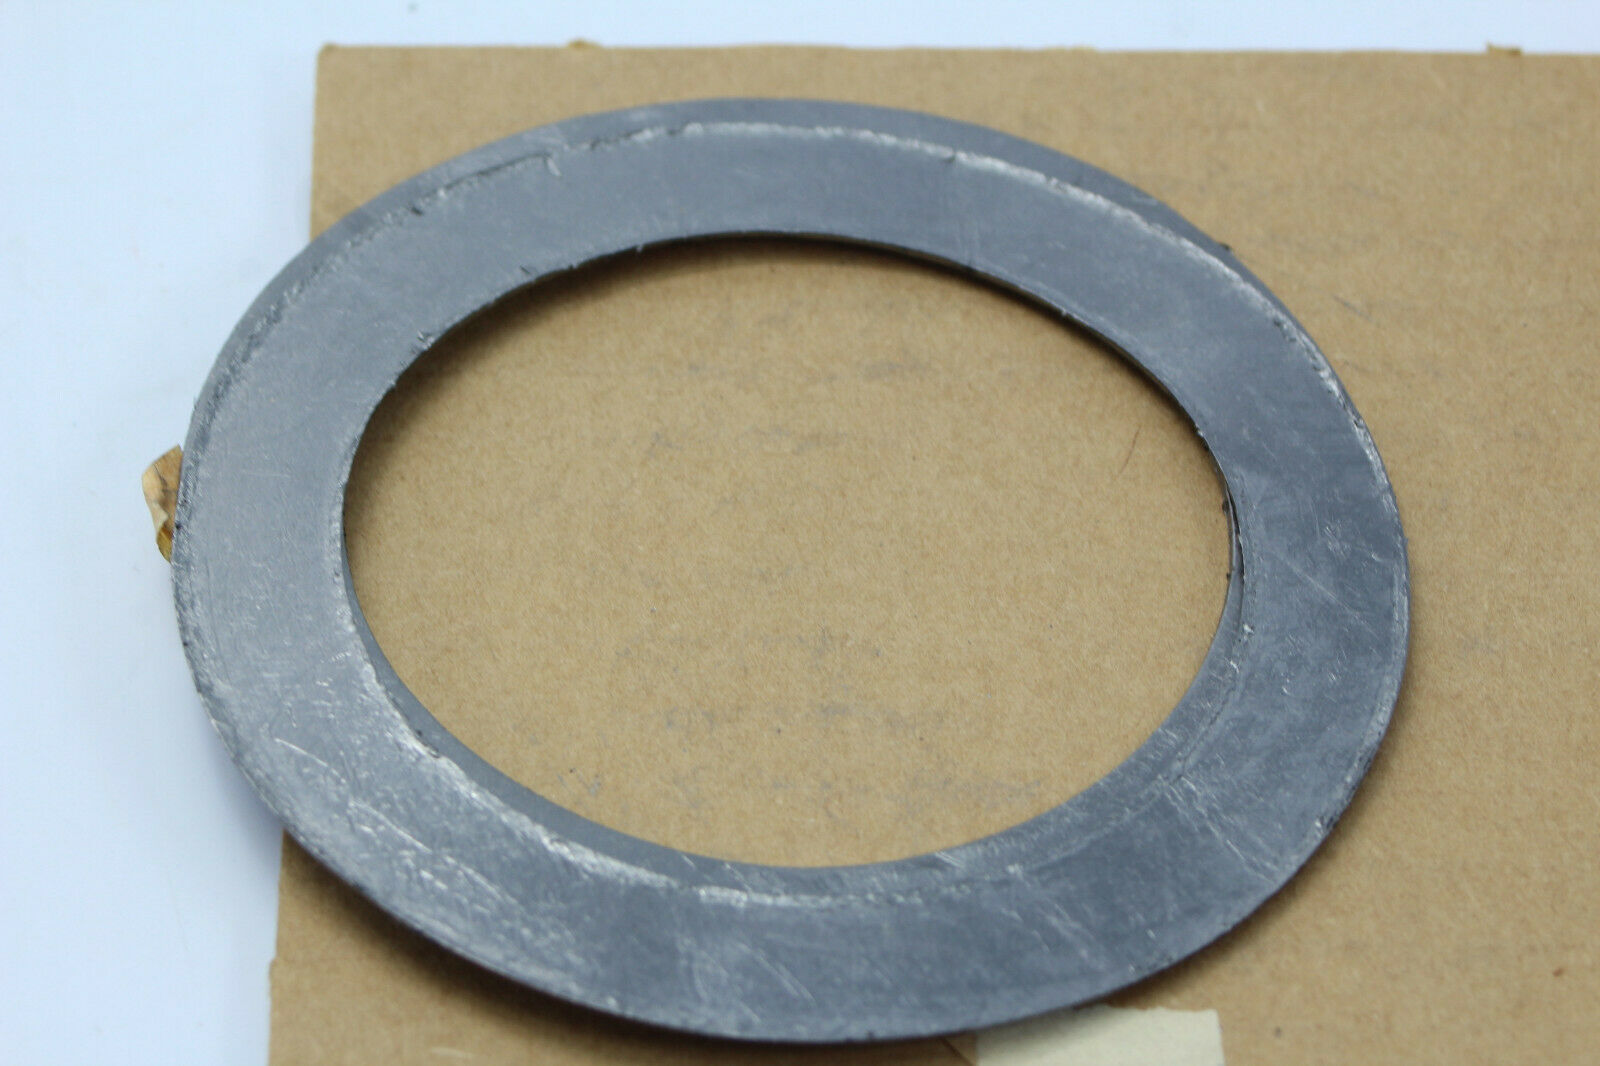 Fisher Controls RGASKETX332 Design E Gasket and similar items